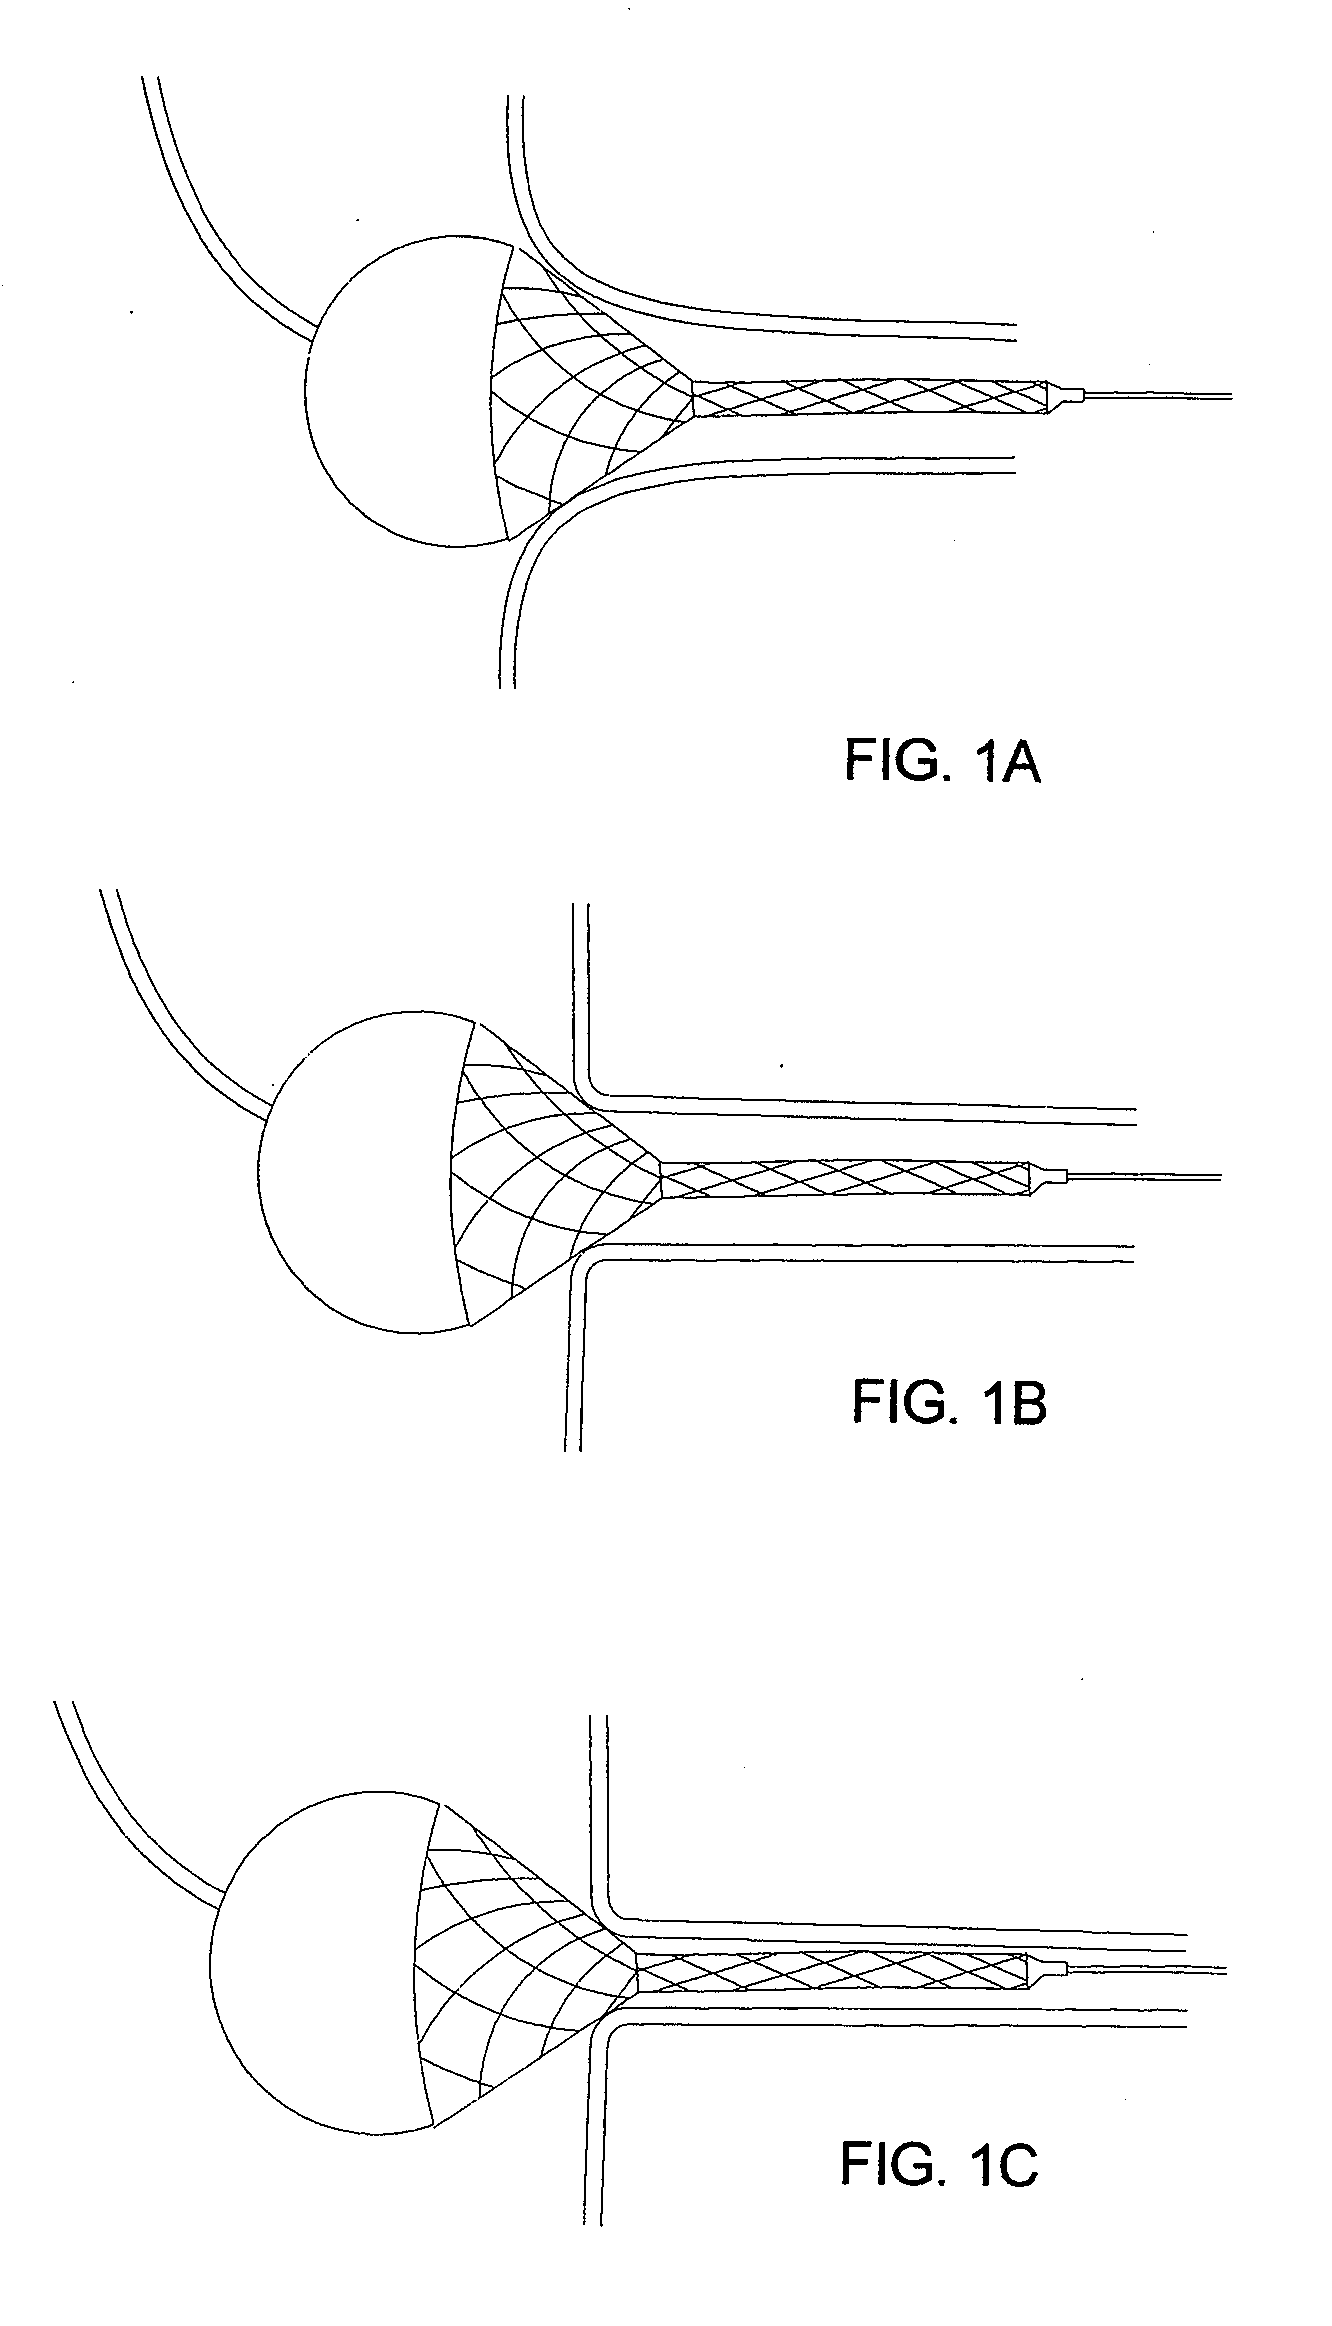 Axially compressible flared stents and apparatus and methods for delivering them